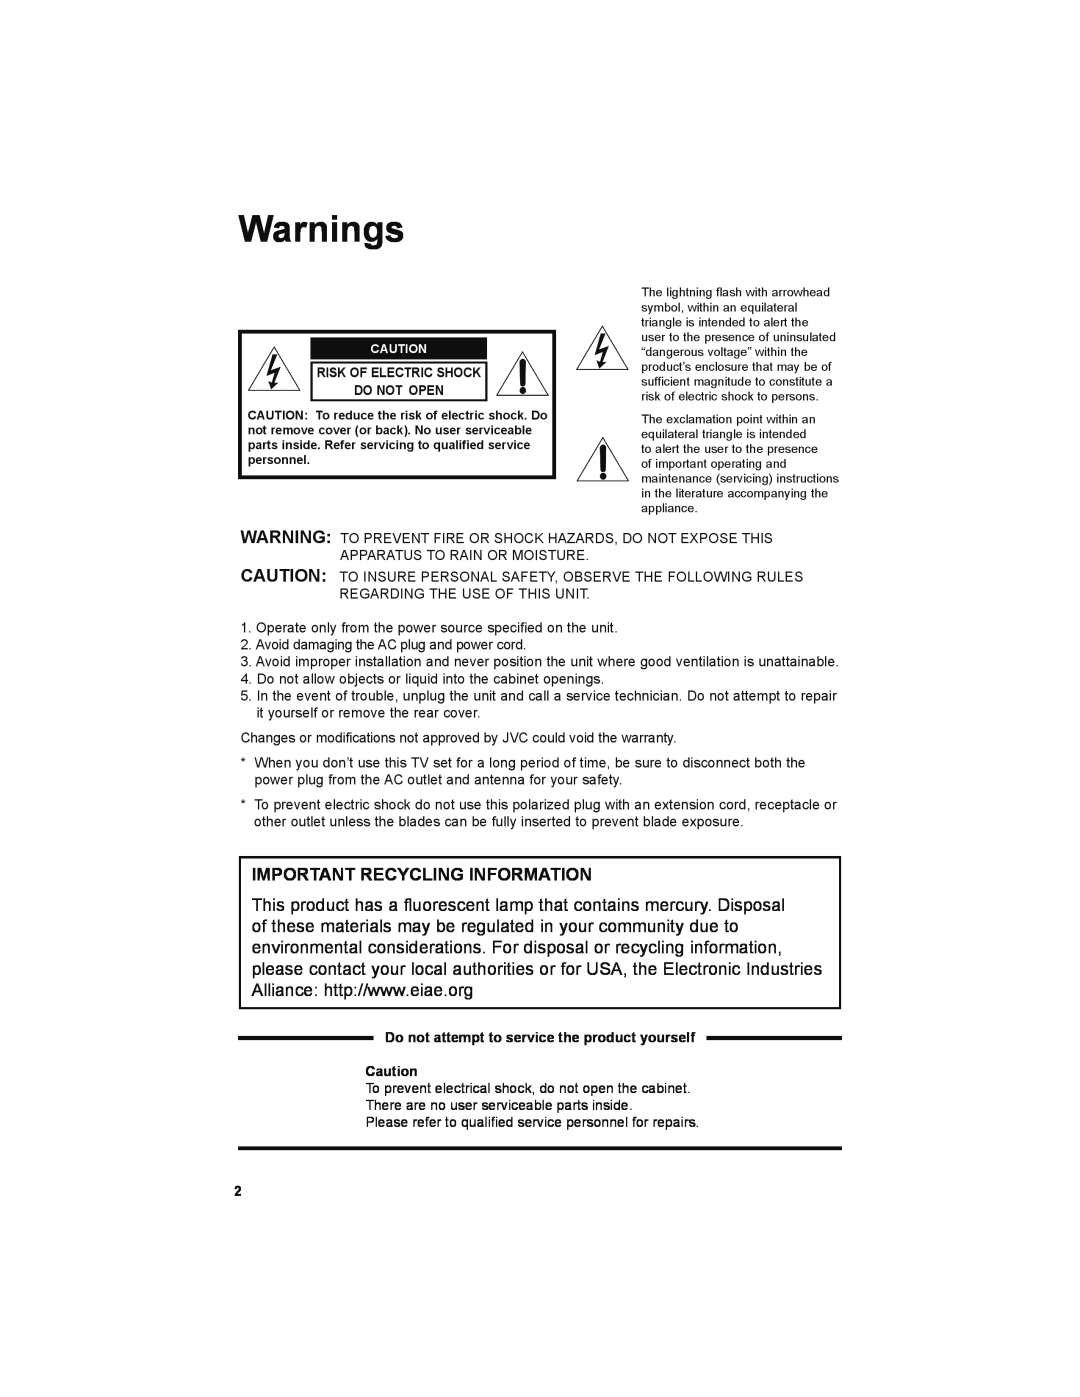 JVC LT-32JM30 manual Warnings, Important Recycling Information, Do not attempt to service the product yourself 